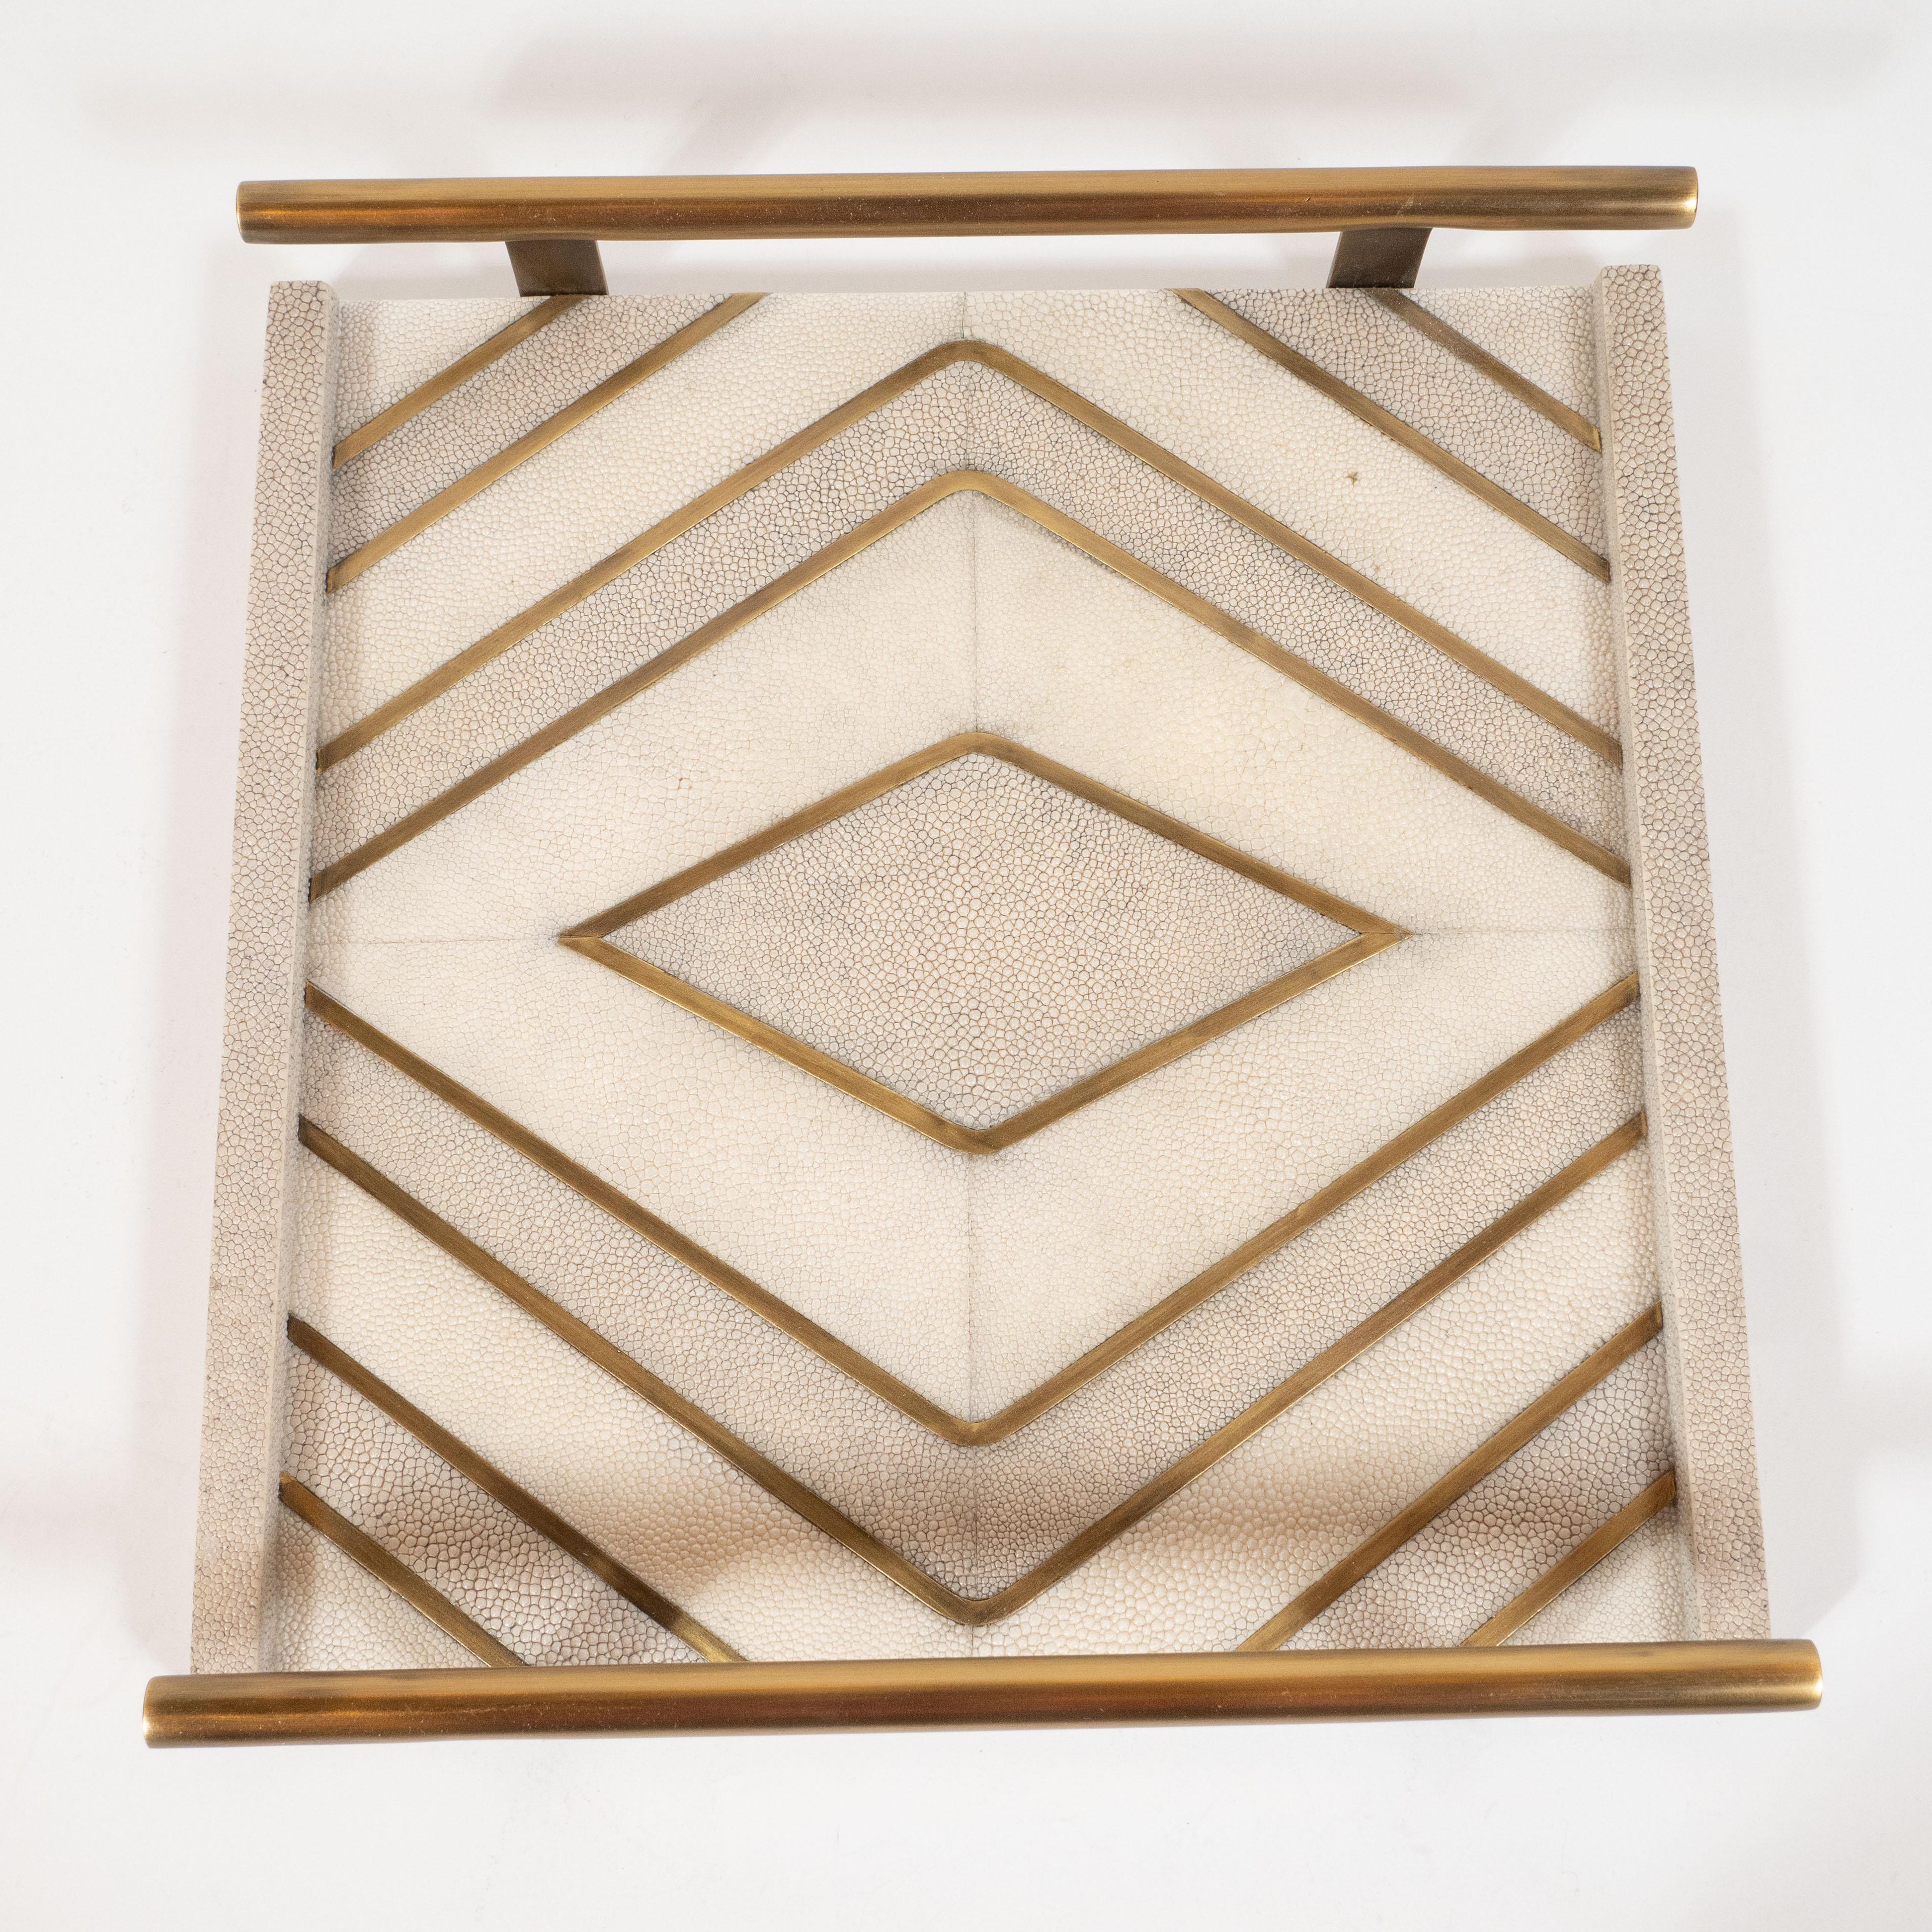 Modernist Concentric Diamond Form Shagreen and Brass Inlay Tray by Kifu, Paris 2